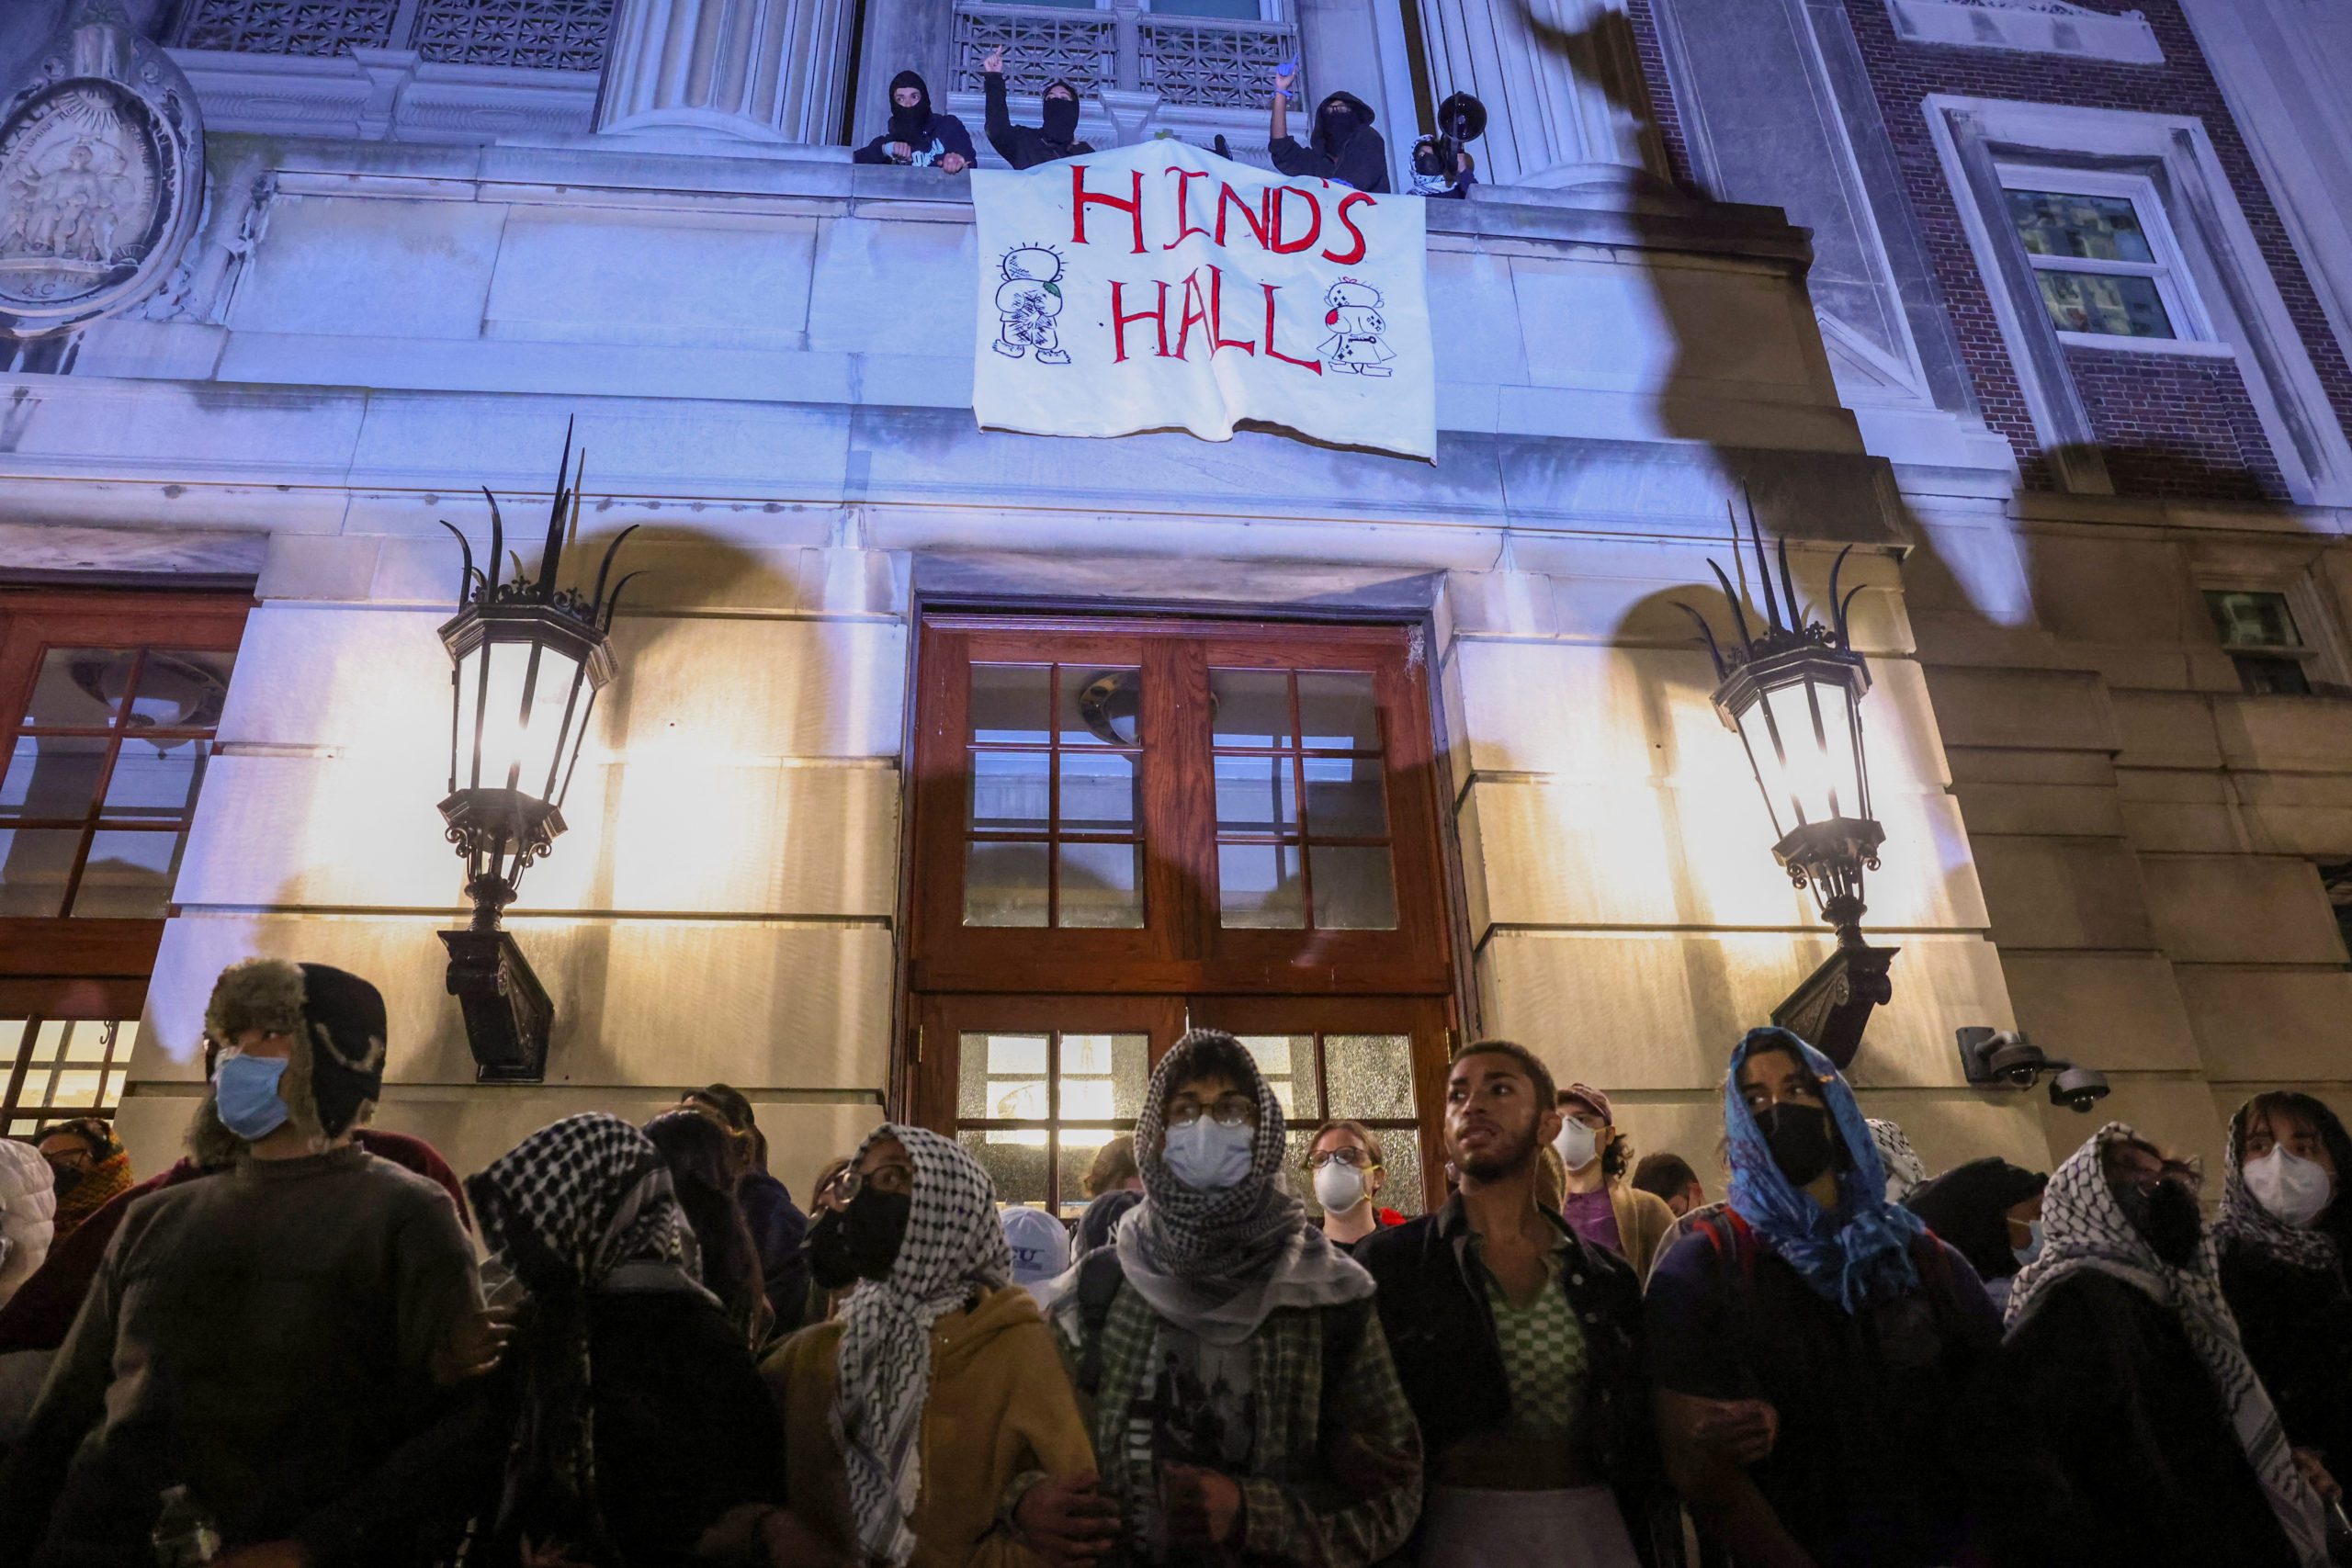 Protesters link arms outside Hamilton Hall barricading students inside the building at Columbia University, despite an order to disband the protest encampment supporting Palestinians or face suspension, during the ongoing conflict between Israel and the Palestinian Islamist group Hamas, in New York City, U.S., April 30, 2024. REUTERS/Caitlin Ochs